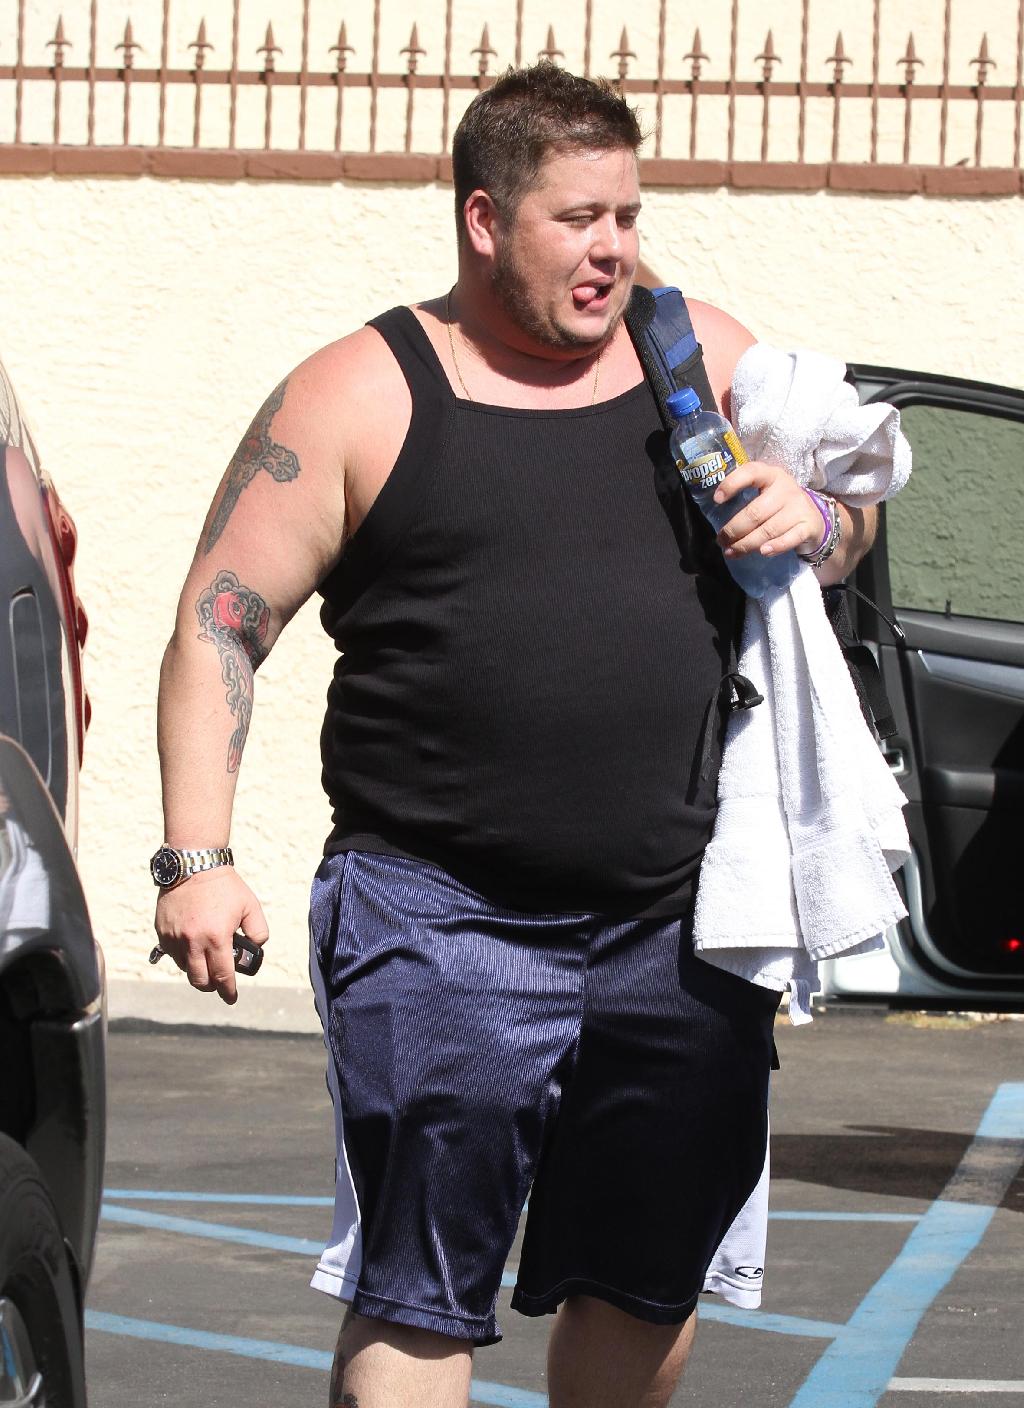 Chaz Bono announced his aim to drop 50 lbs in weight in November and thanks...